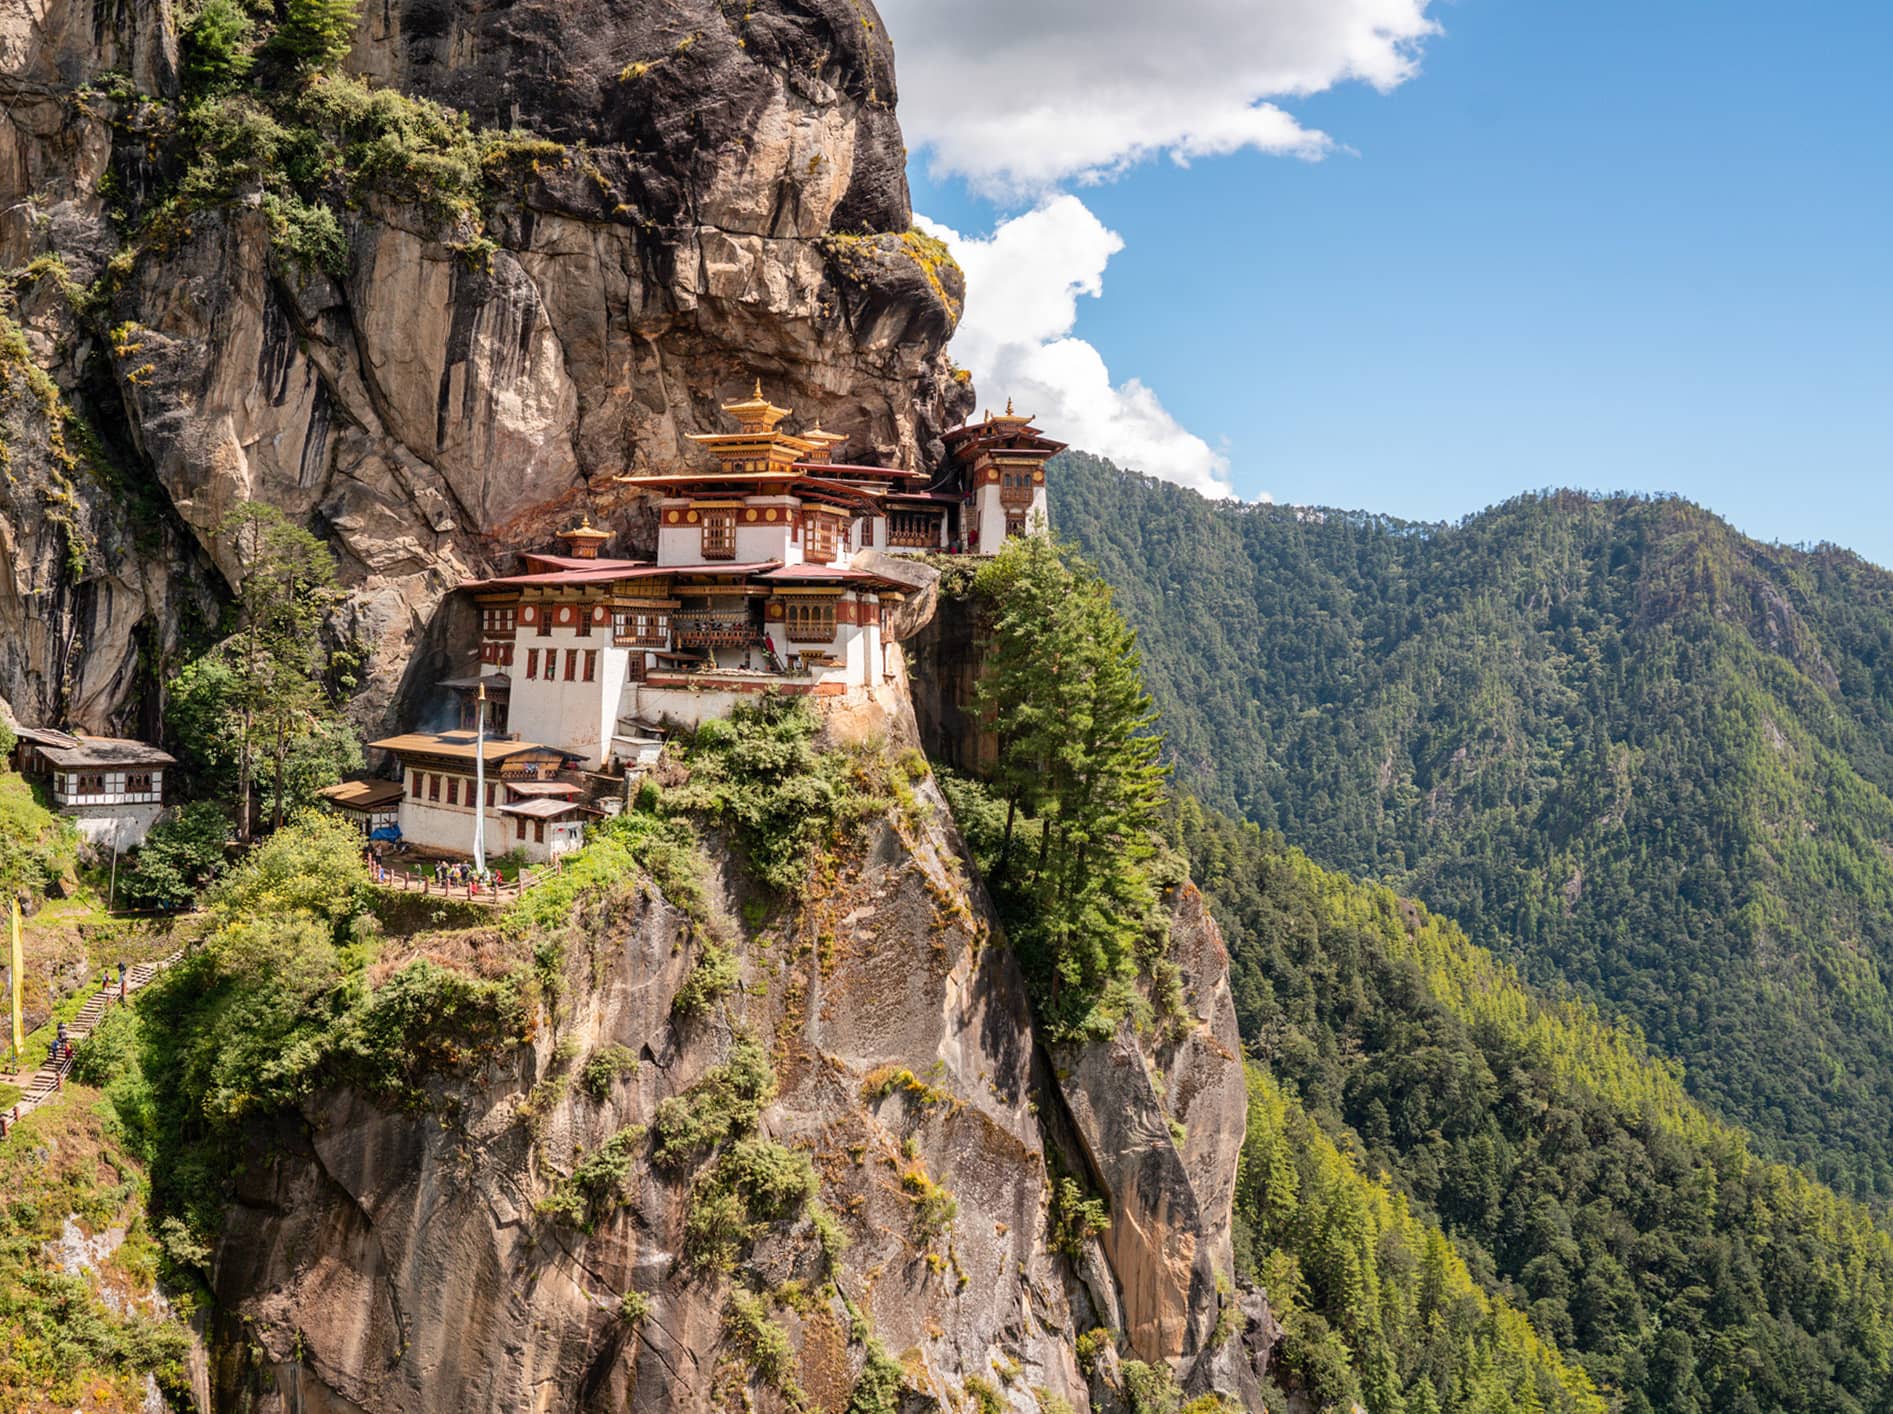  Hike to the Tiger’s Nest Monastery.  